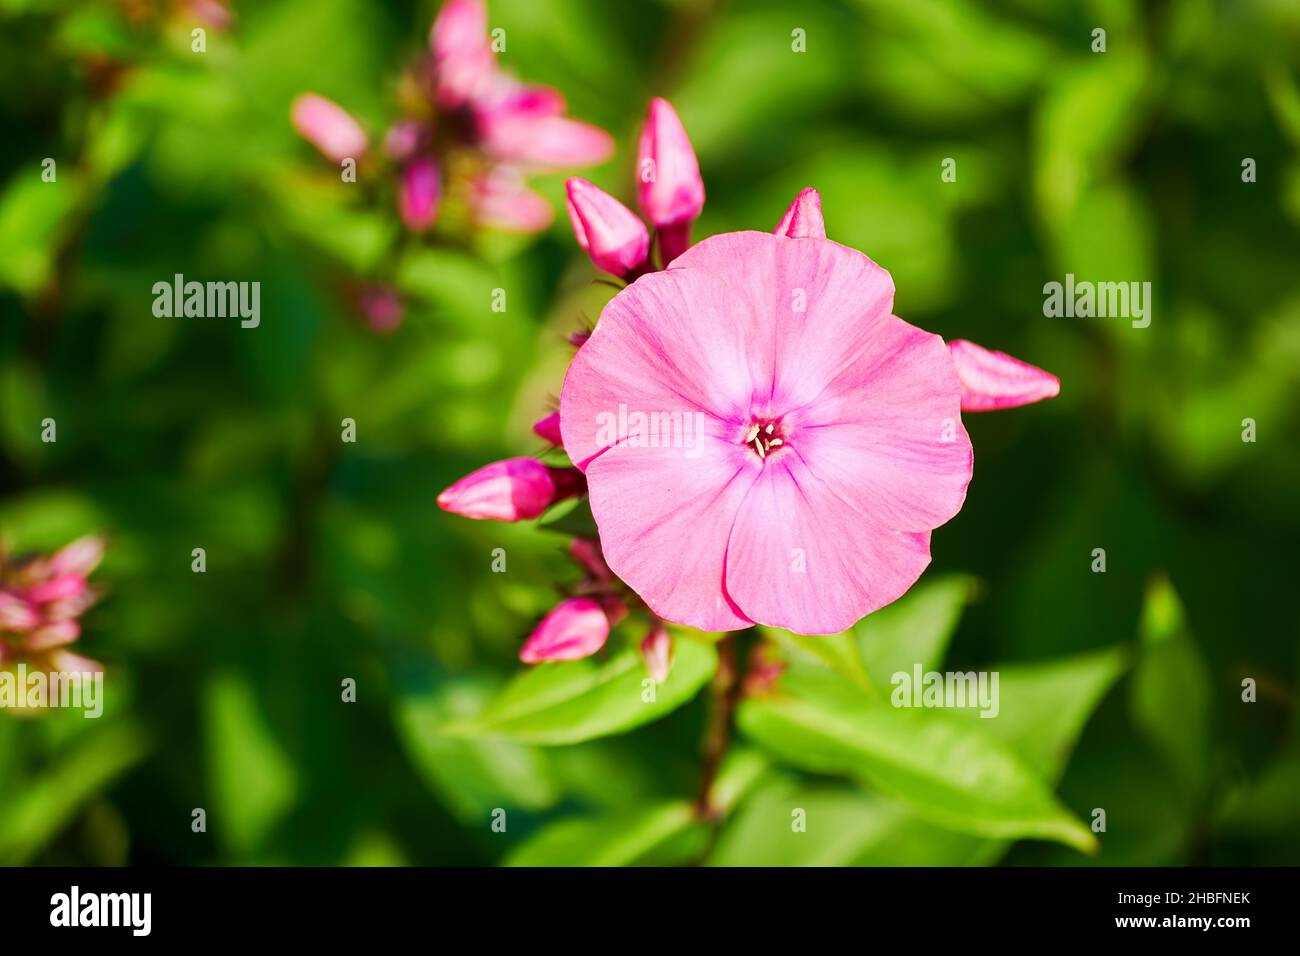 Single elegant pink phlox flower on a green blurred background. Flowers and herbal backgrounds Stock Photo